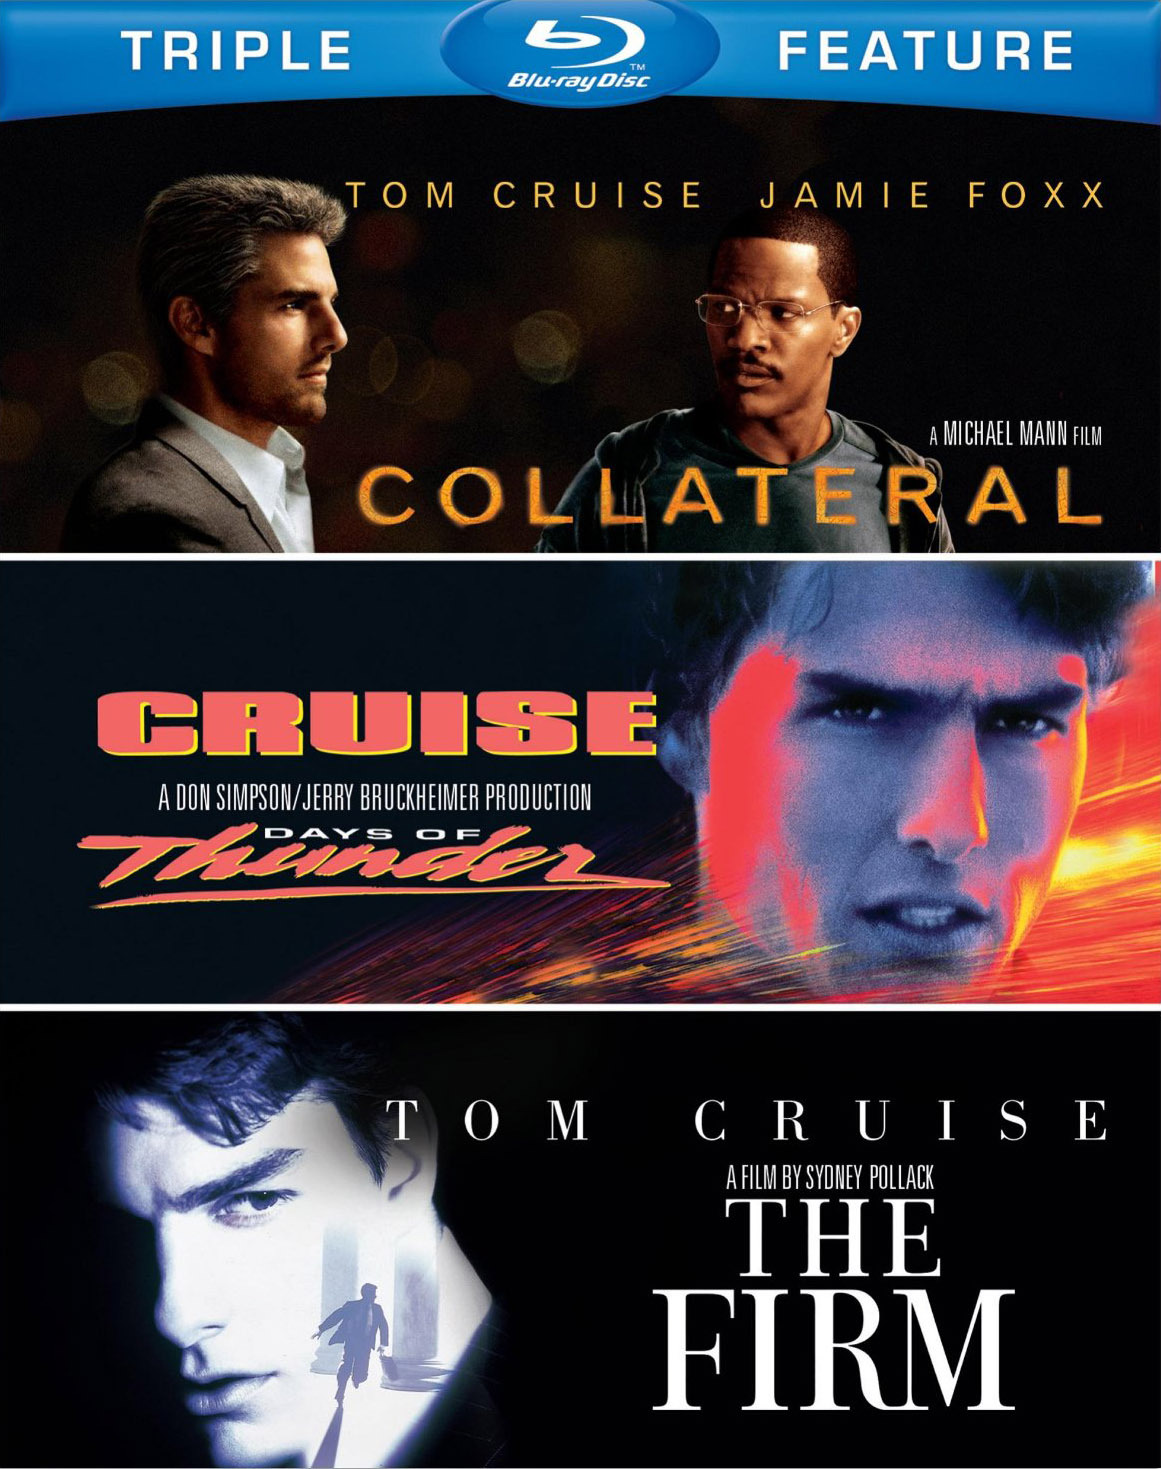 Tom Cruise: Triple Feature